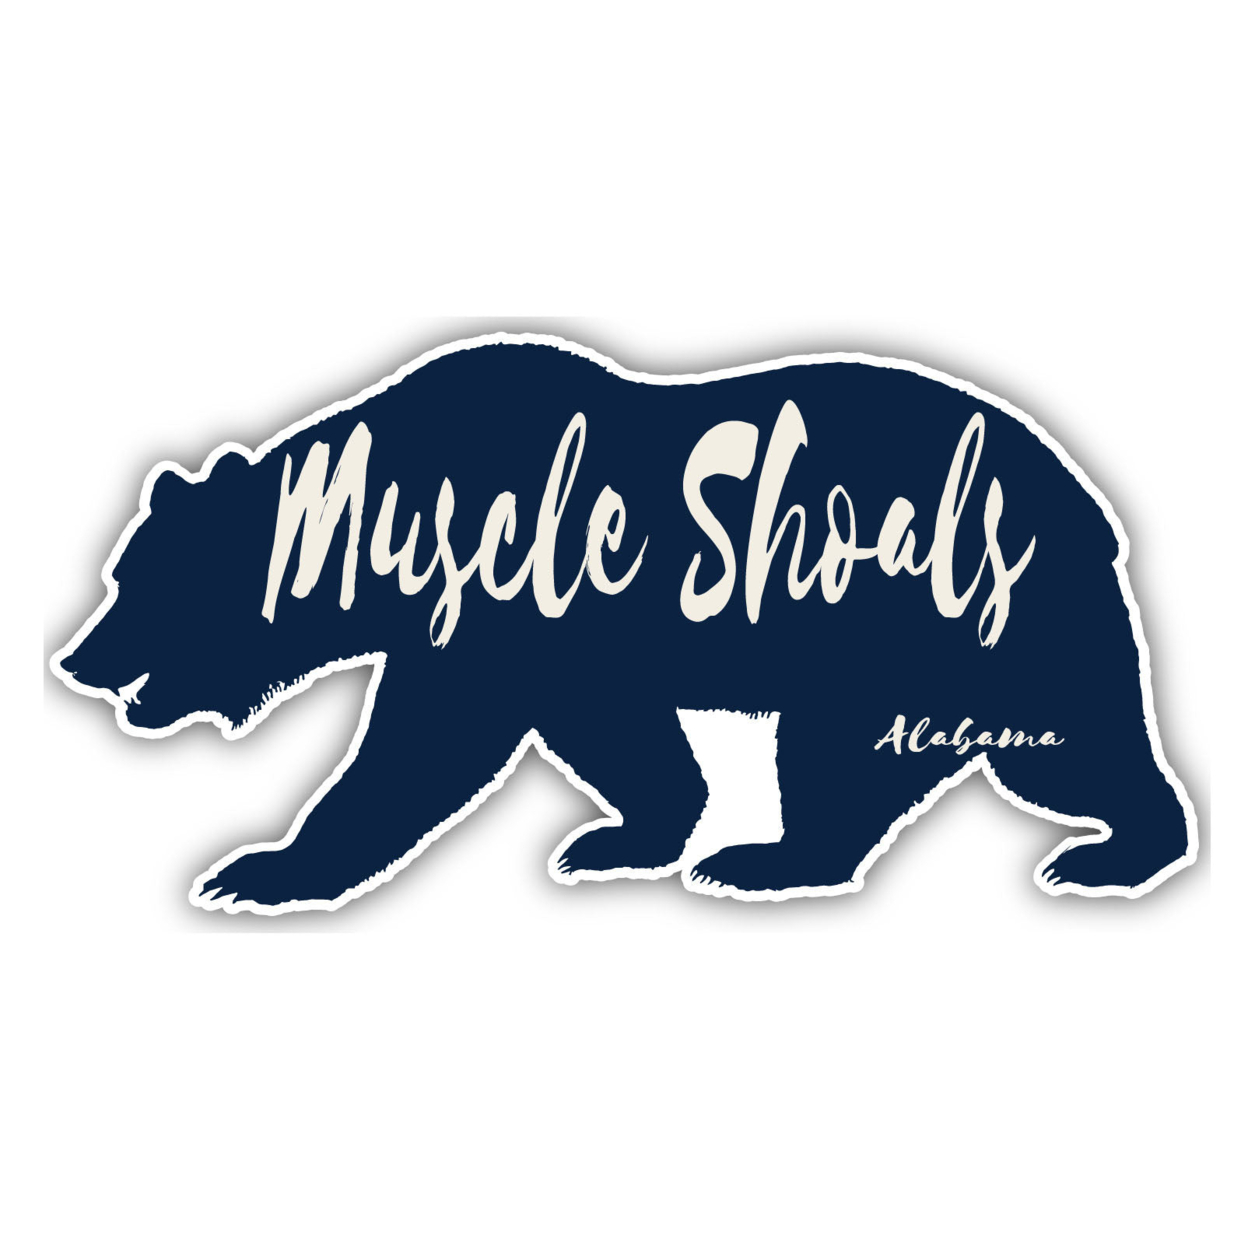 Muscle Shoals Alabama Souvenir Decorative Stickers (Choose Theme And Size) - Single Unit, 2-Inch, Great Outdoors